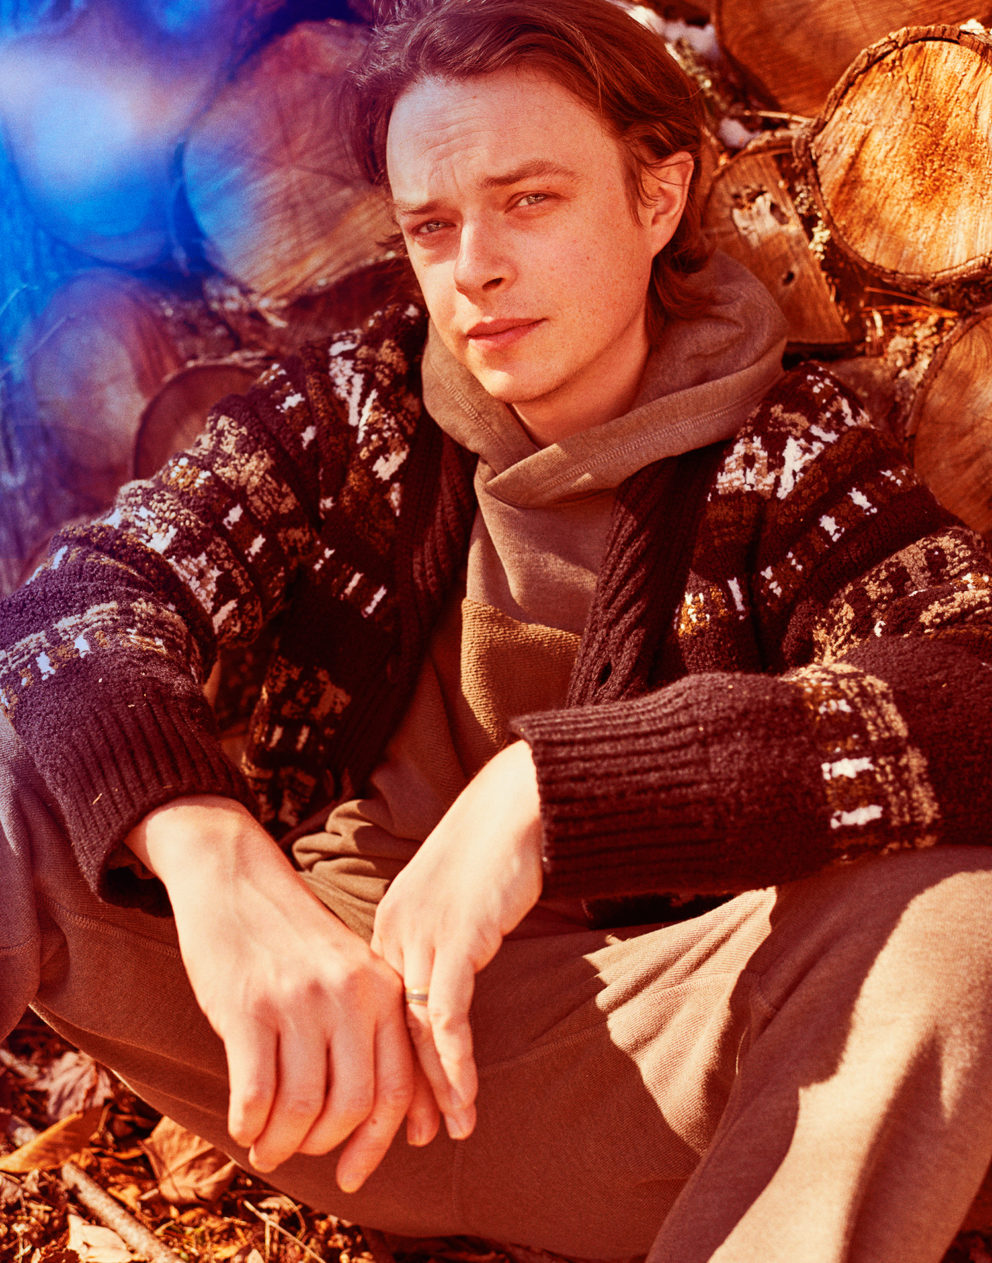 180310 Dane Dehaan By Christian Hogstedt 04